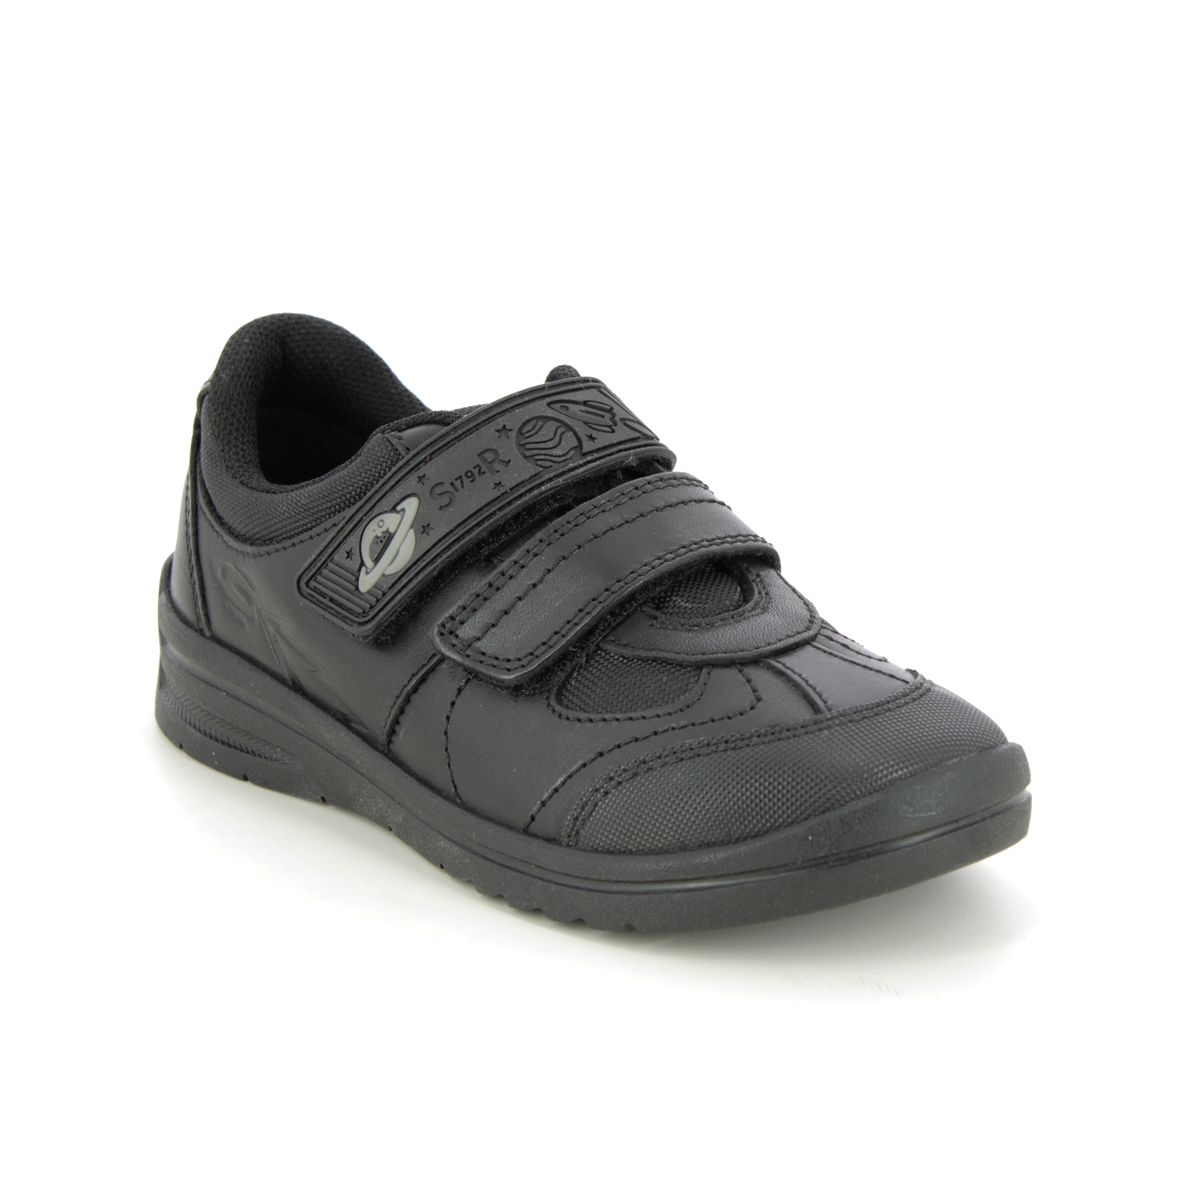 Start Rite - Rocket 2V In Black Leather 2797-75E In Size 1.5 In Plain Black Leather For School Boys Shoes  In Black Leather For kids